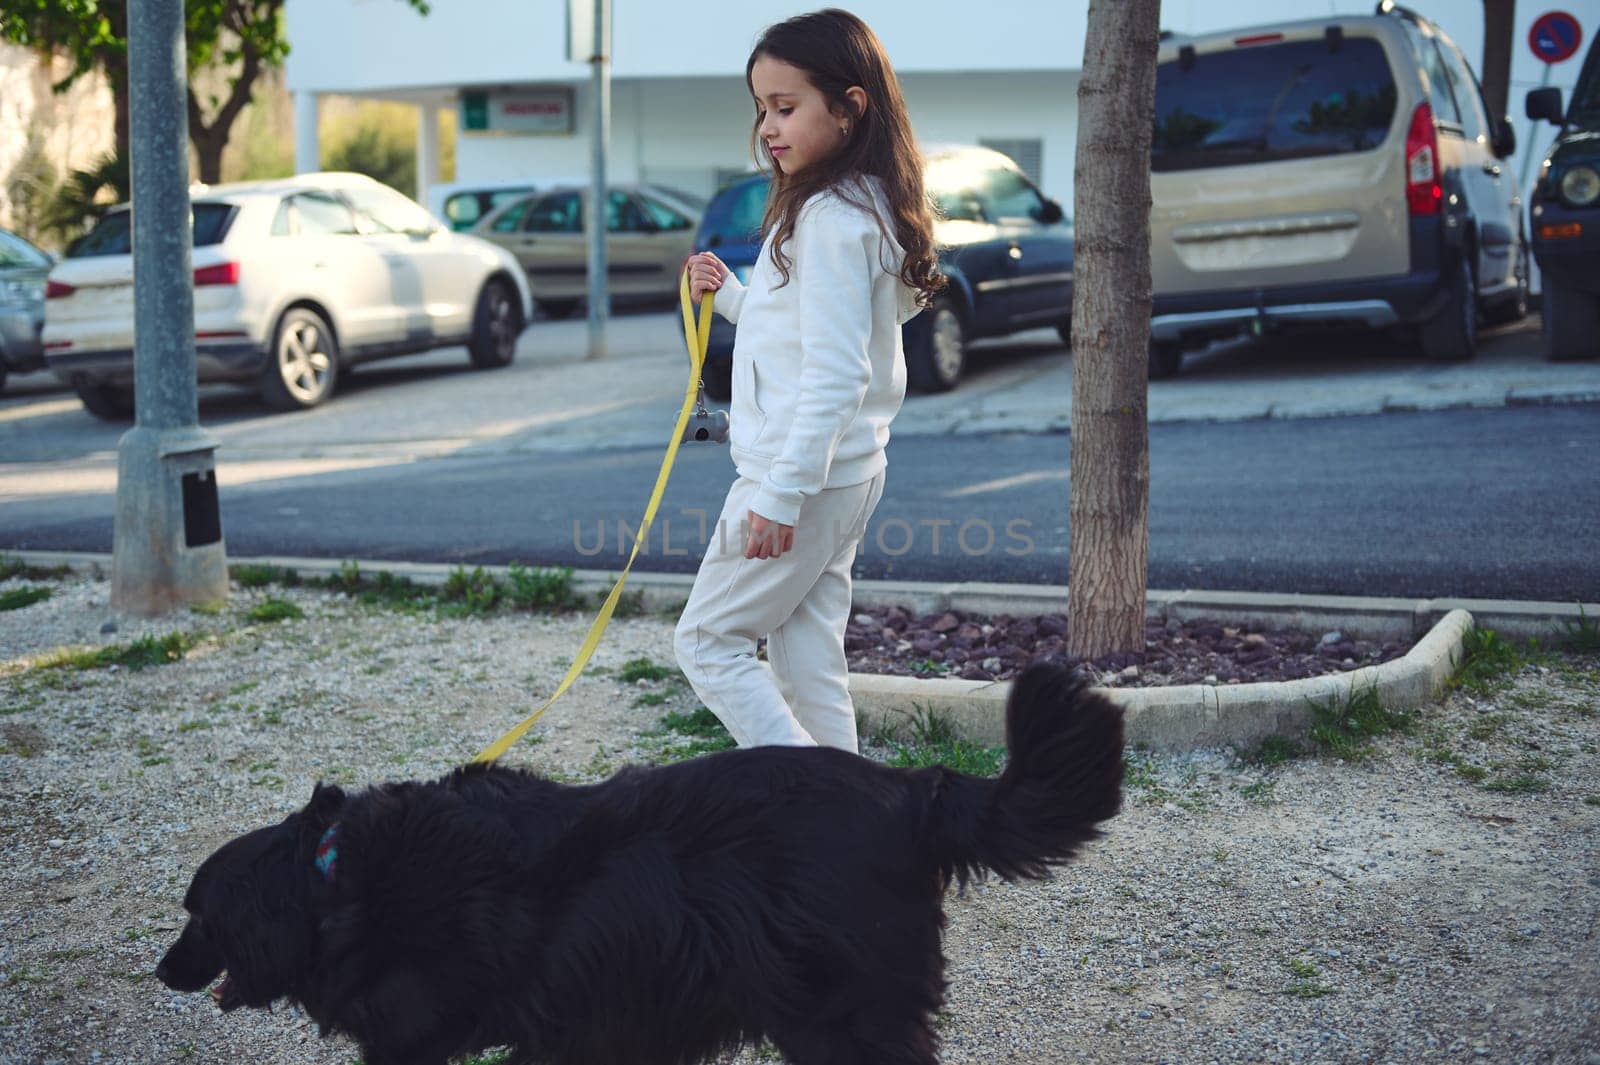 Cute child girl walking her pedigree pet on leash , a young black cocker spaniel dog outdoors. Playing pets. People and animals concept by artgf